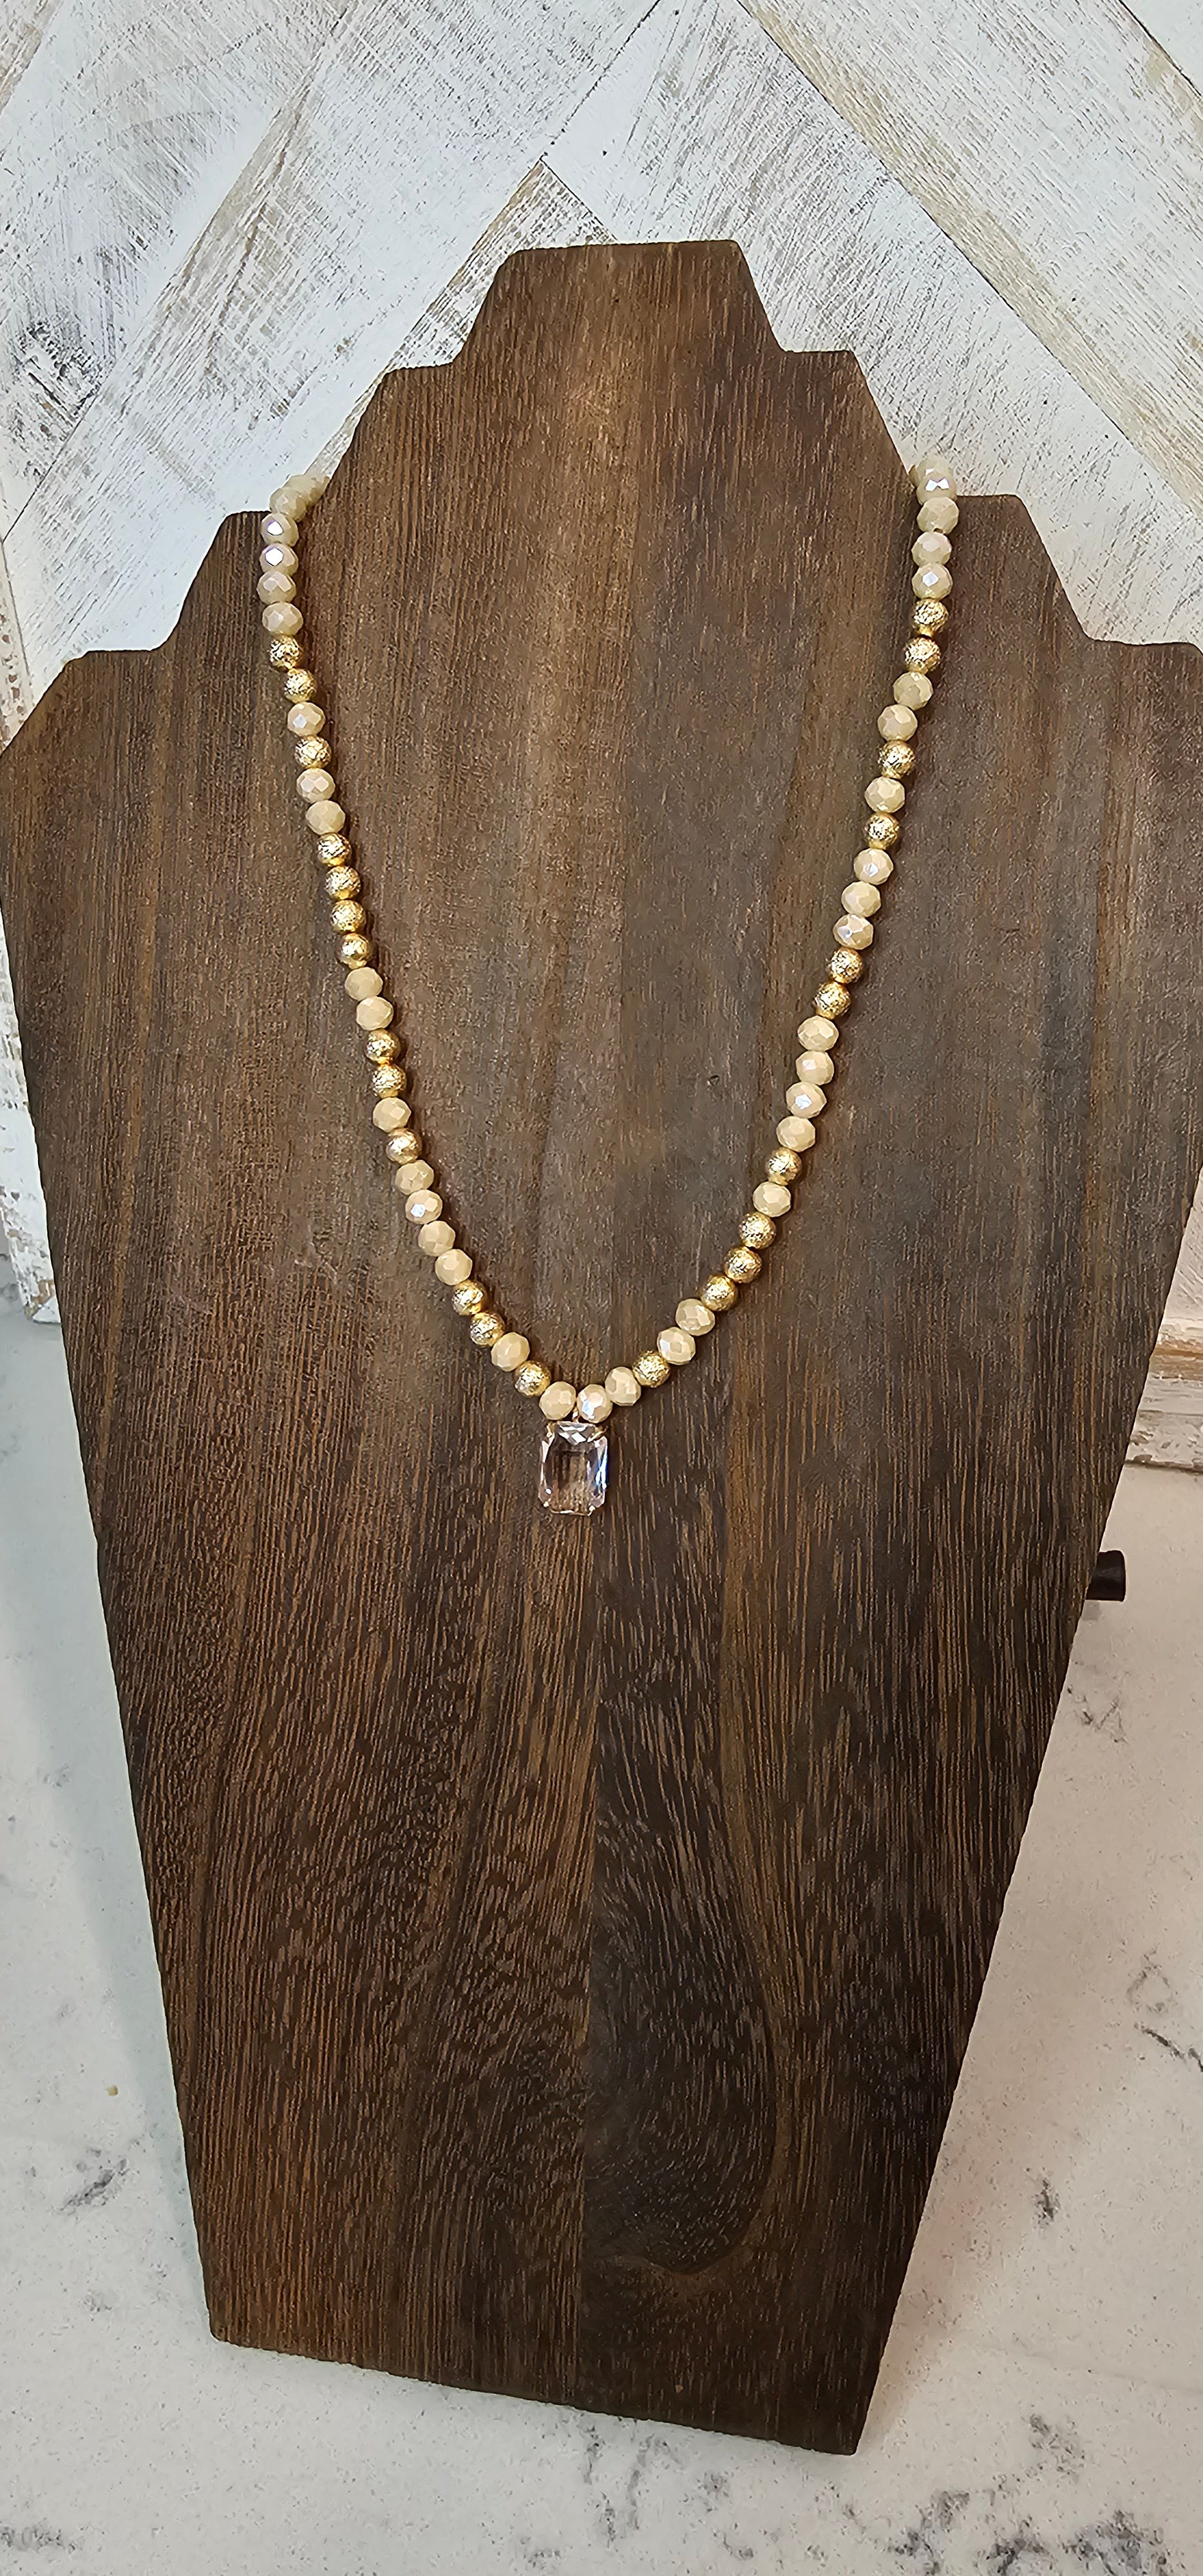 Adjustable chain Color: Gold link chains with peach fuzz & gold beads, clear crystal Limited supply!  